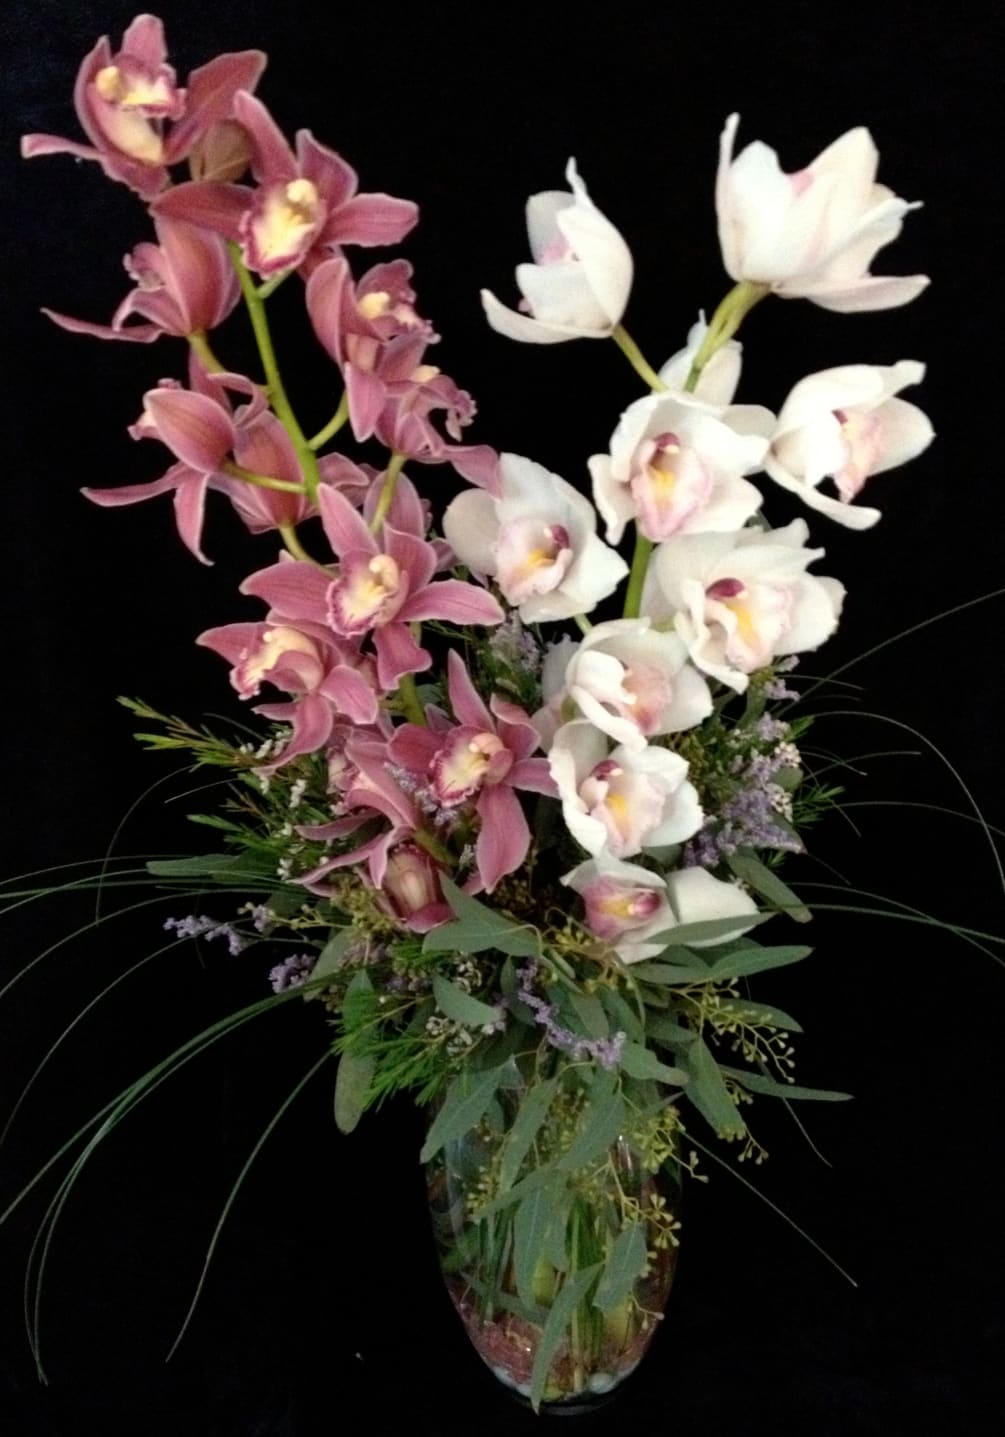 Send this beautiful arrangement with 2 cymbidium orchids to someone special in